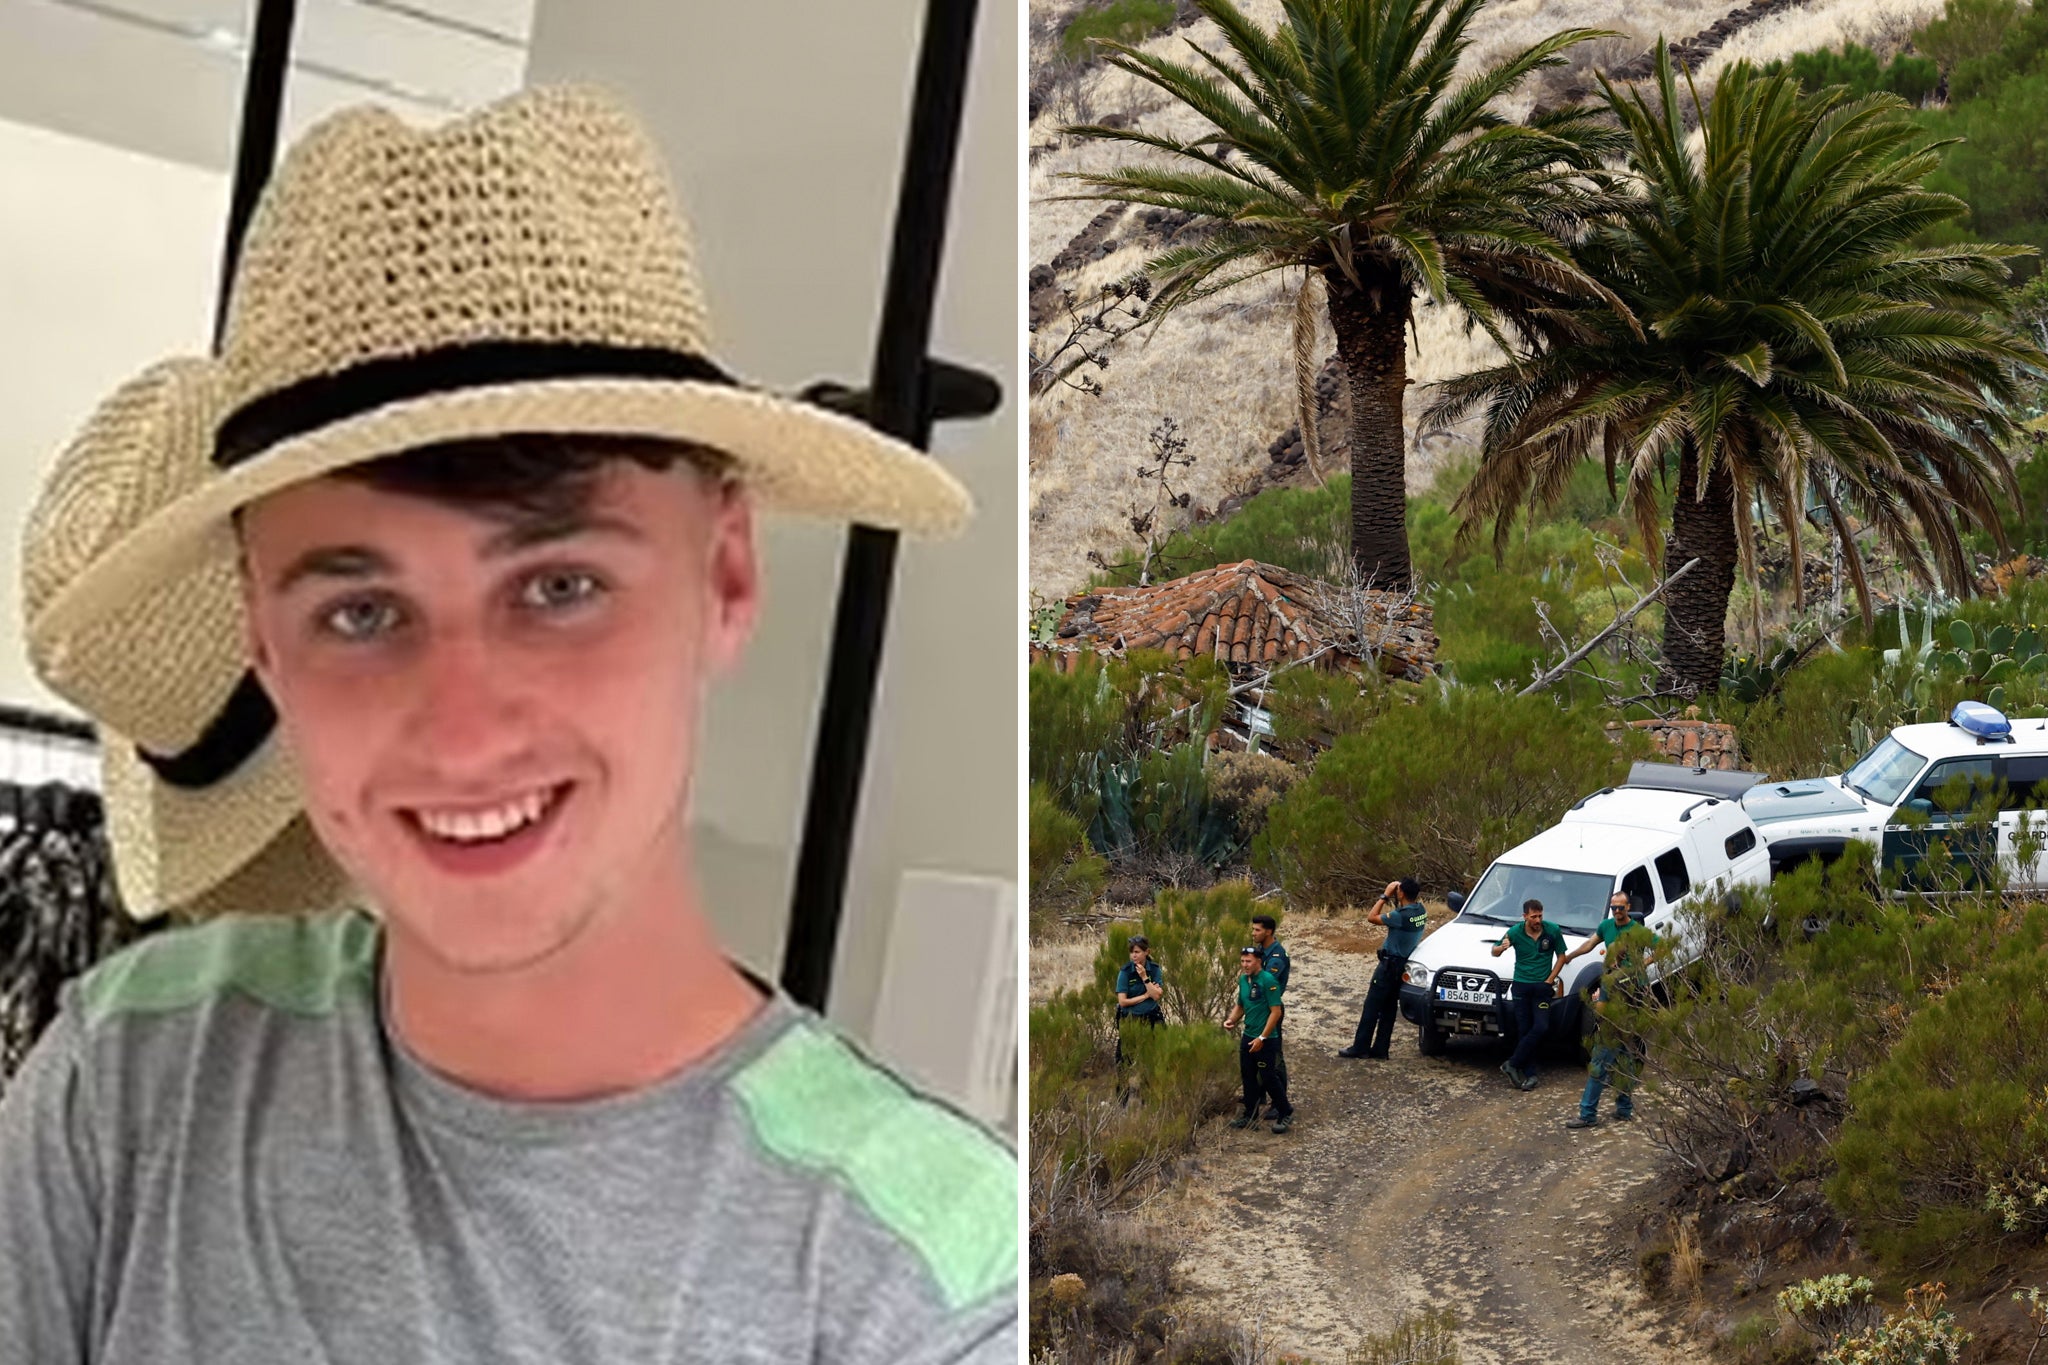 tenerife, missing, jay slater’s mother pleads with tenerife police to keep up investigation into missing teenager